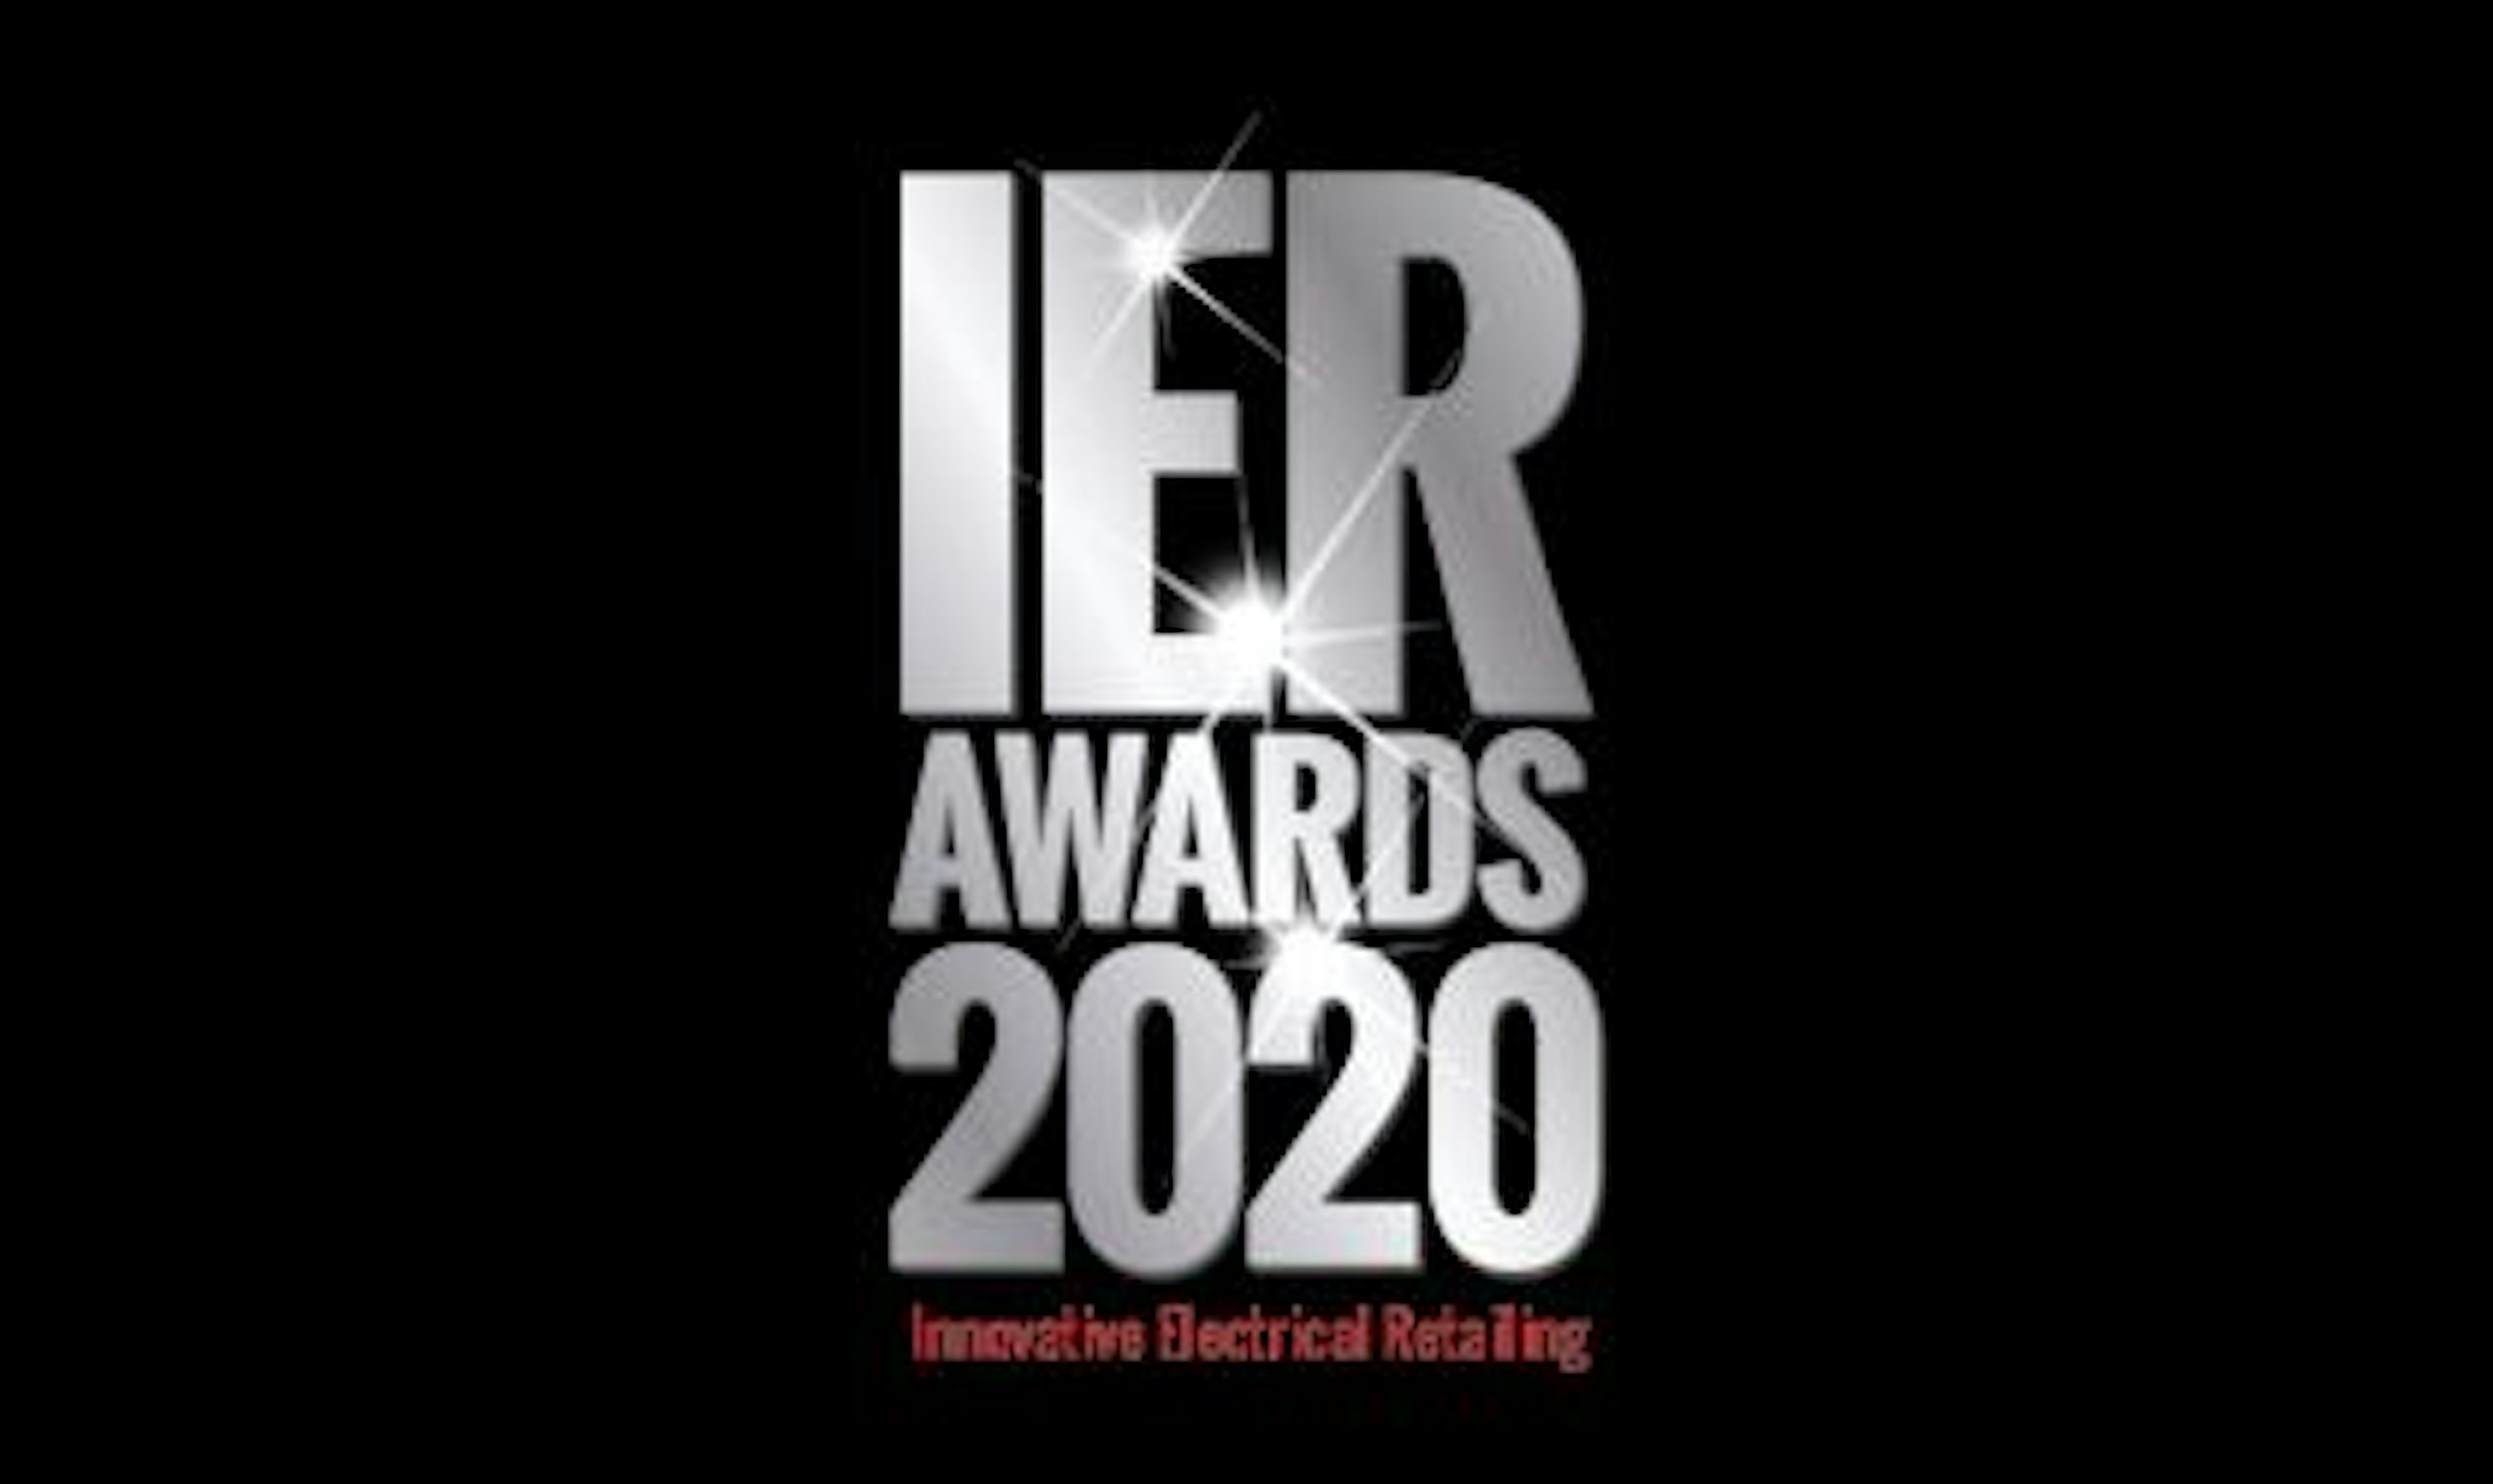 Forbes is Shortlisted as a Finalist for Three IER Awards in 2020